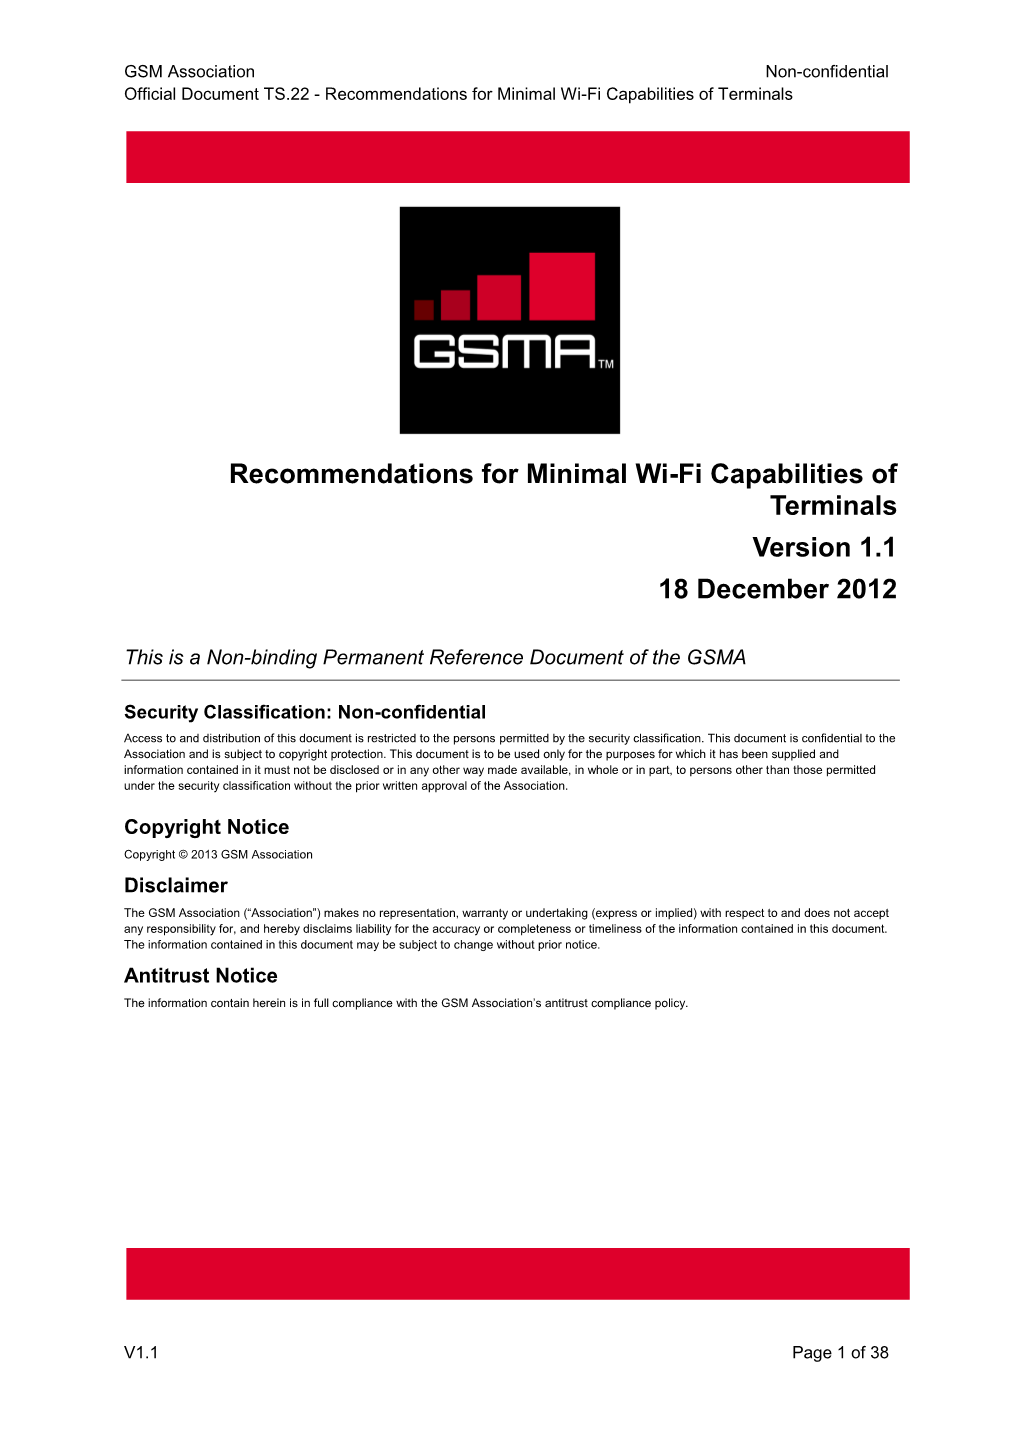 Recommendations for Minimal Wi-Fi Capabilities of Terminals Version 1.1 18 December 2012